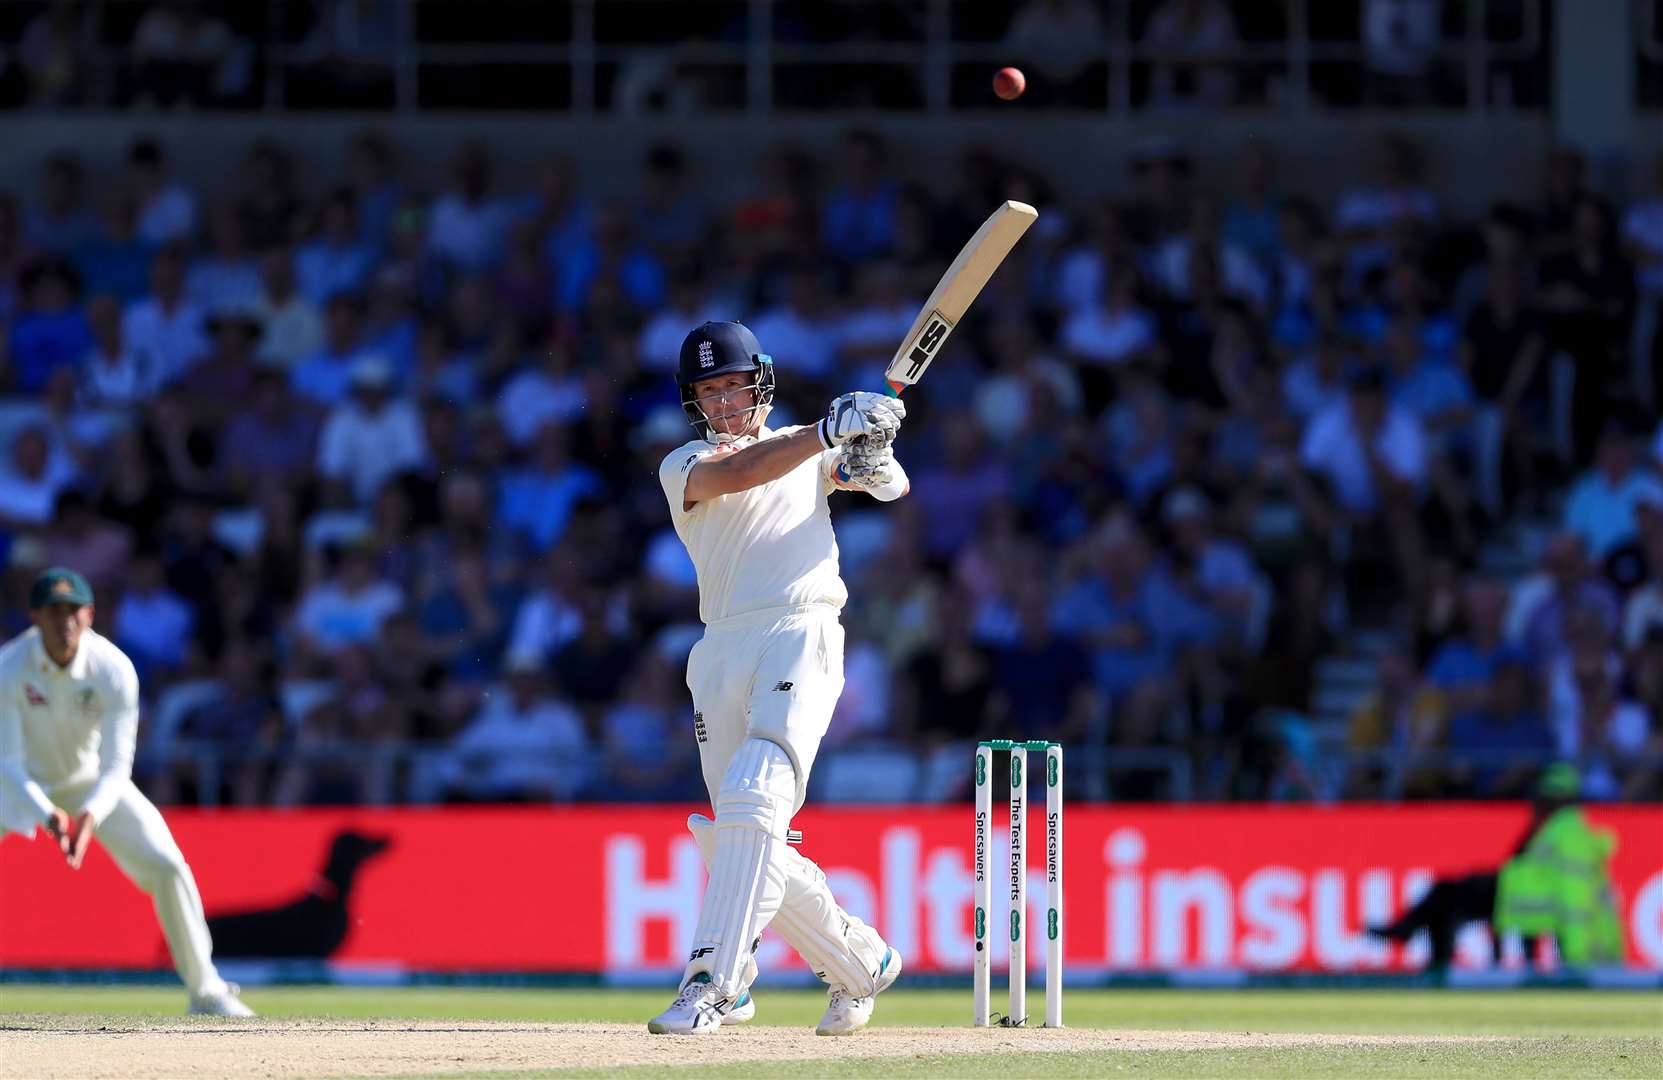 England's Joe Denly batting during day three of the third Ashes Test match at Headingley